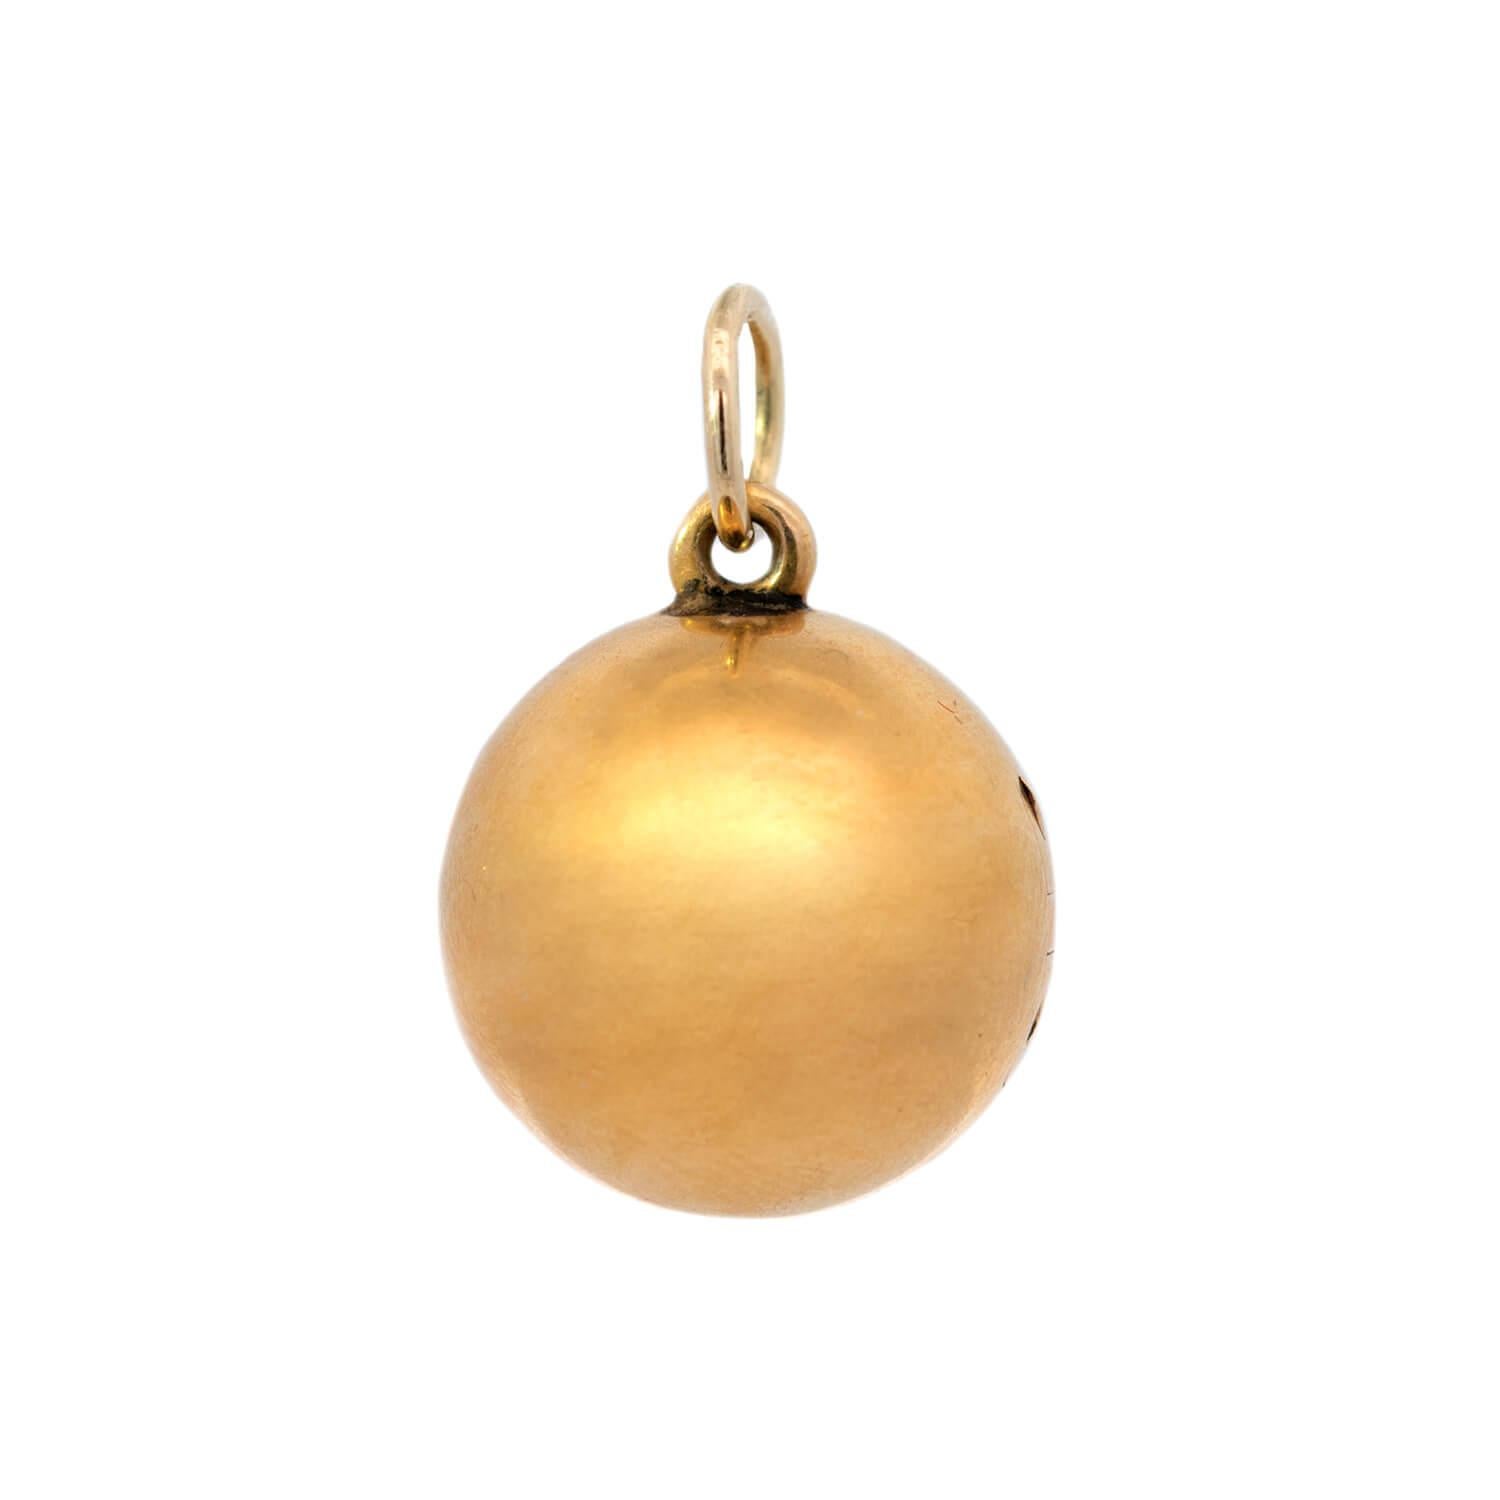 A fabulous hidden key ball pendant from the Victorian (ca1880) era! This stylish piece is made of vibrant 18kt yellow gold and has a three-dimensional spherical shape. The outside of the ball is a smooth surface and is hollow inside. The ball opens